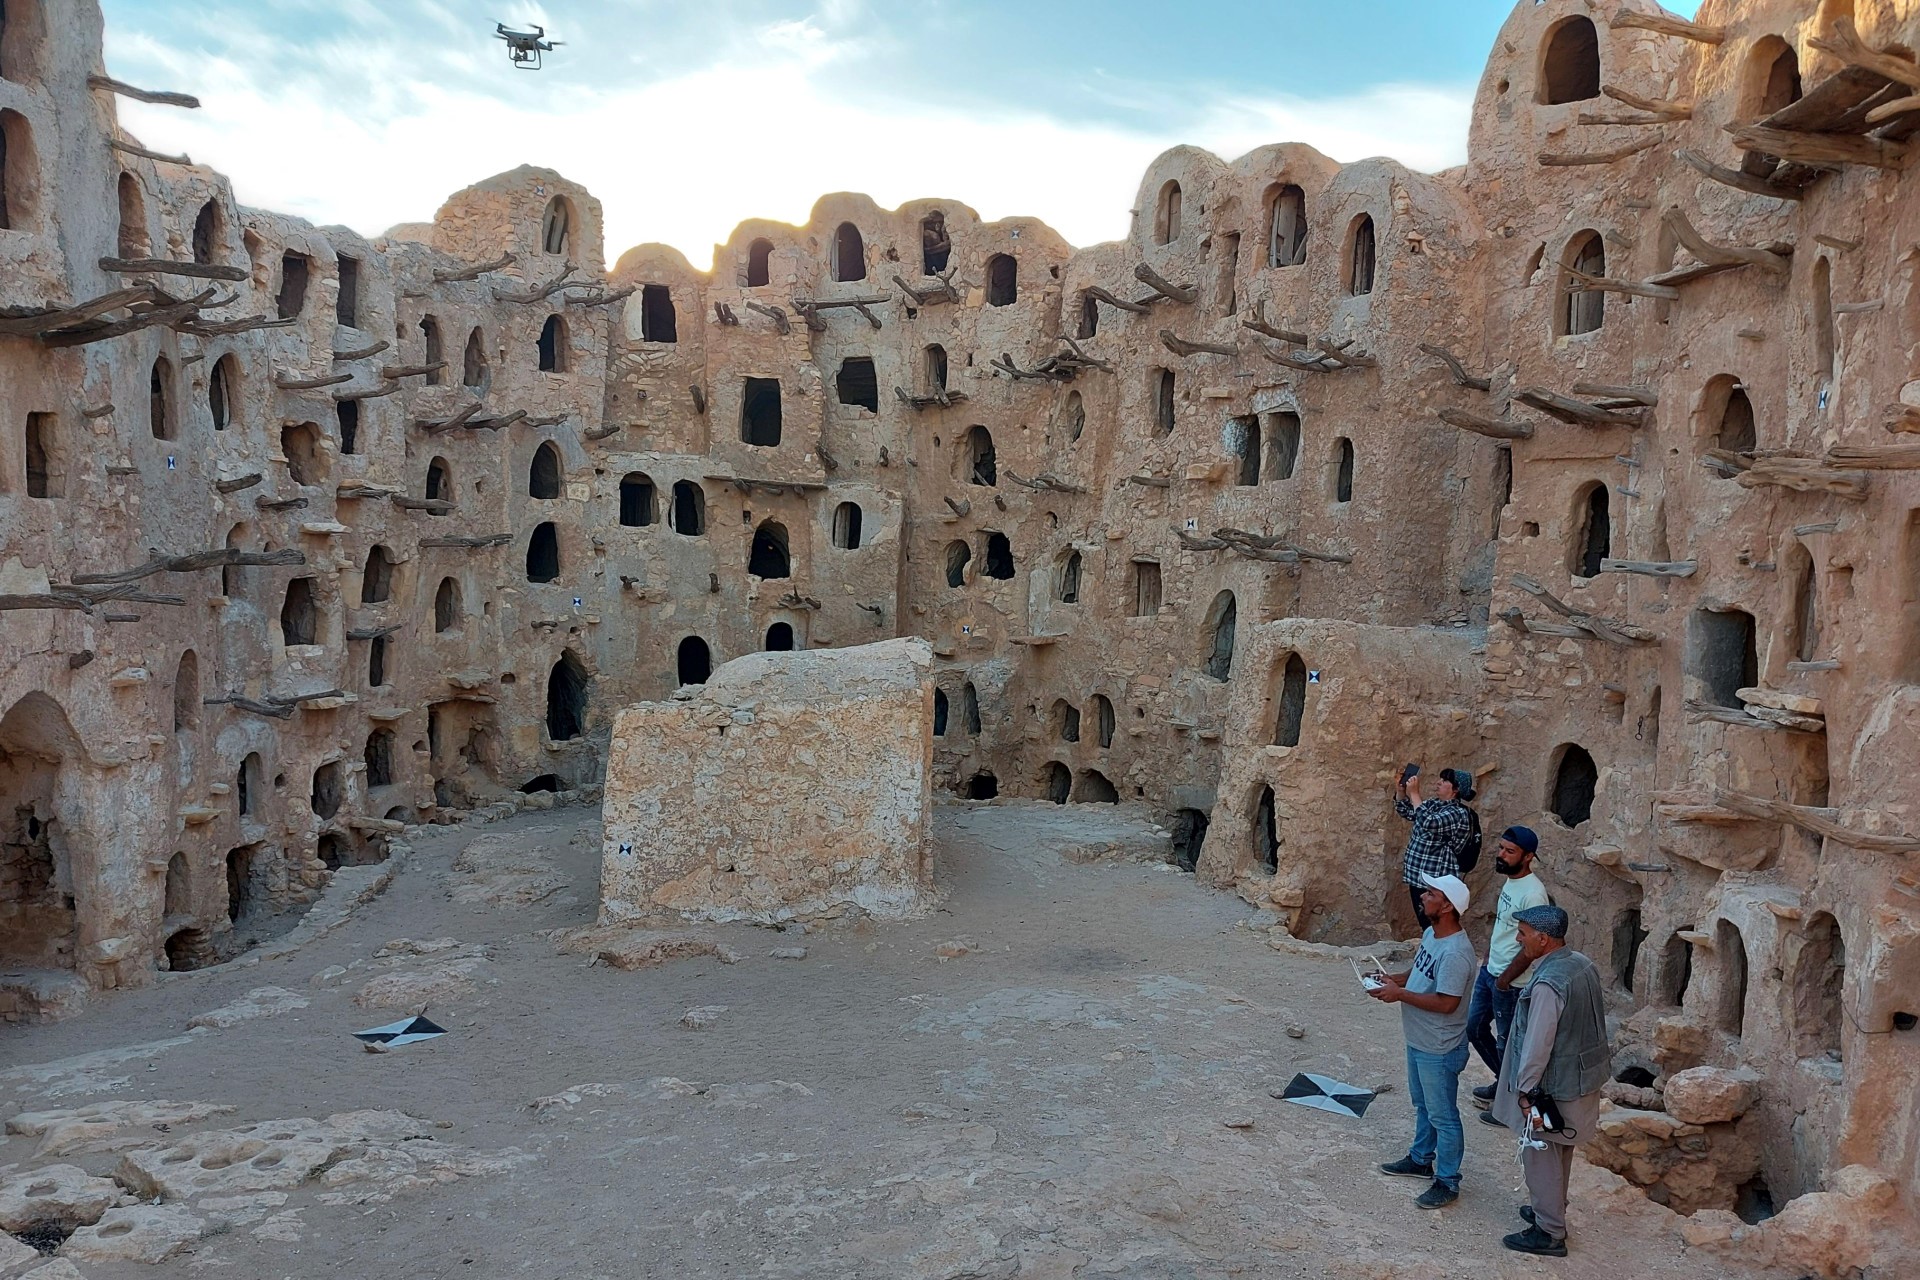 Archaeologists stand within the remains of stone buildings, and one of them controls a small drone flying above the buildings. They are located in Kasr Kabaw, Libya.